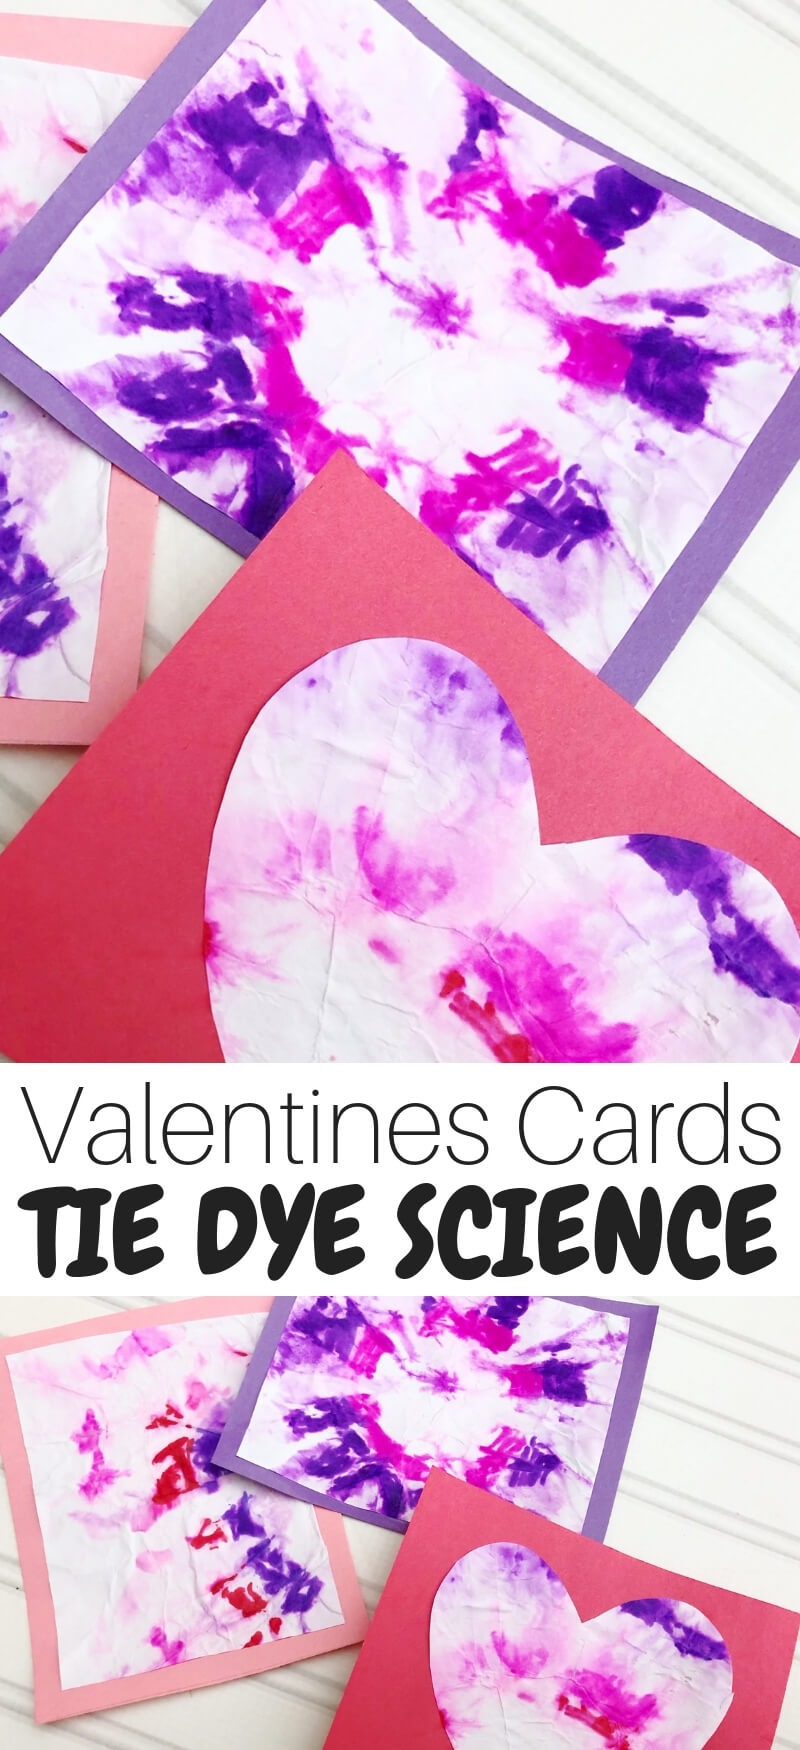 These Sharpie Tie Dye Science Valentines Card are the perfect way to bring the fun into science experiments! Your child will love creating these cards! Explore these kid-friendly science activities and experiments today! #science #tiedye #valentinescards #scienceexperiments